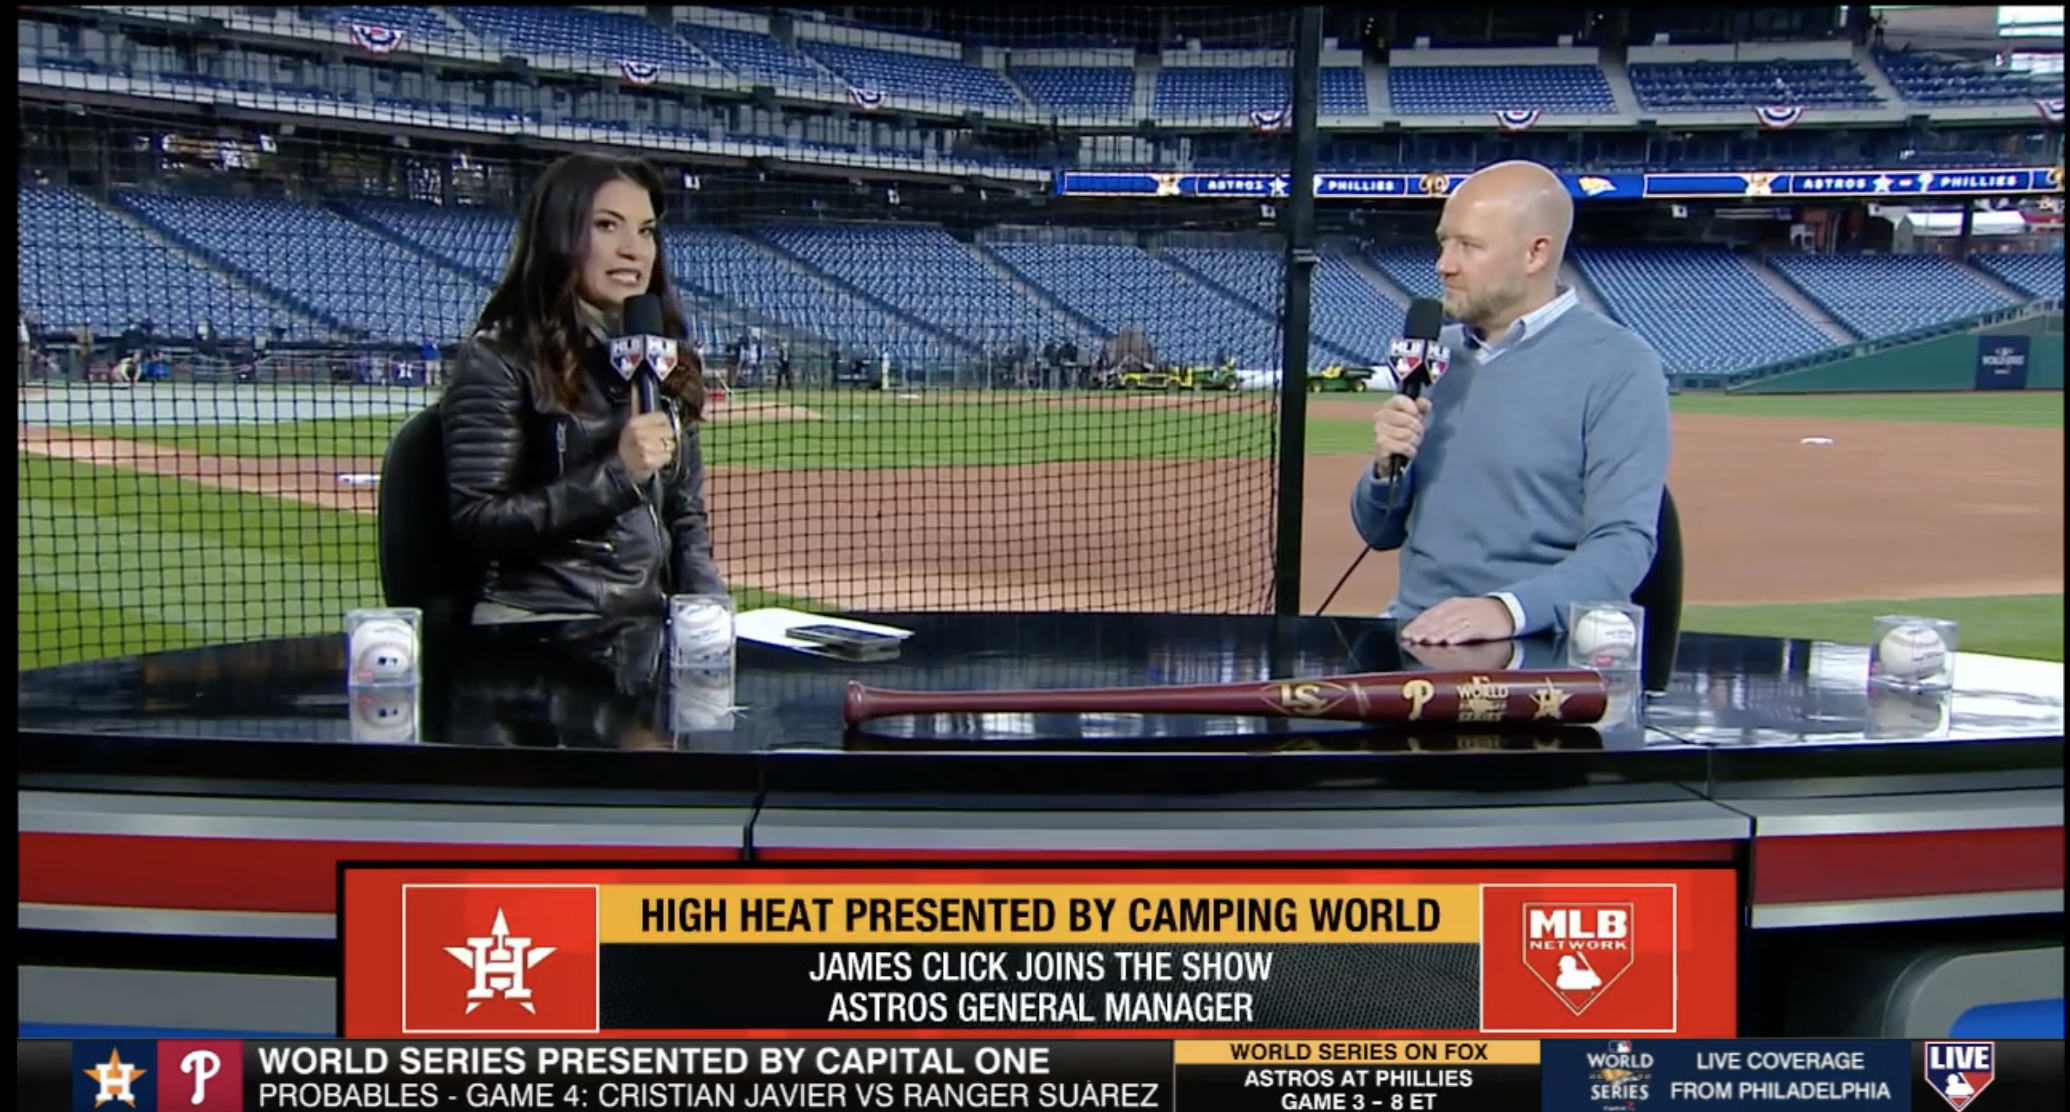 MLB Network Expands World Series Coverage; New Sets, 5G Are in the Mix